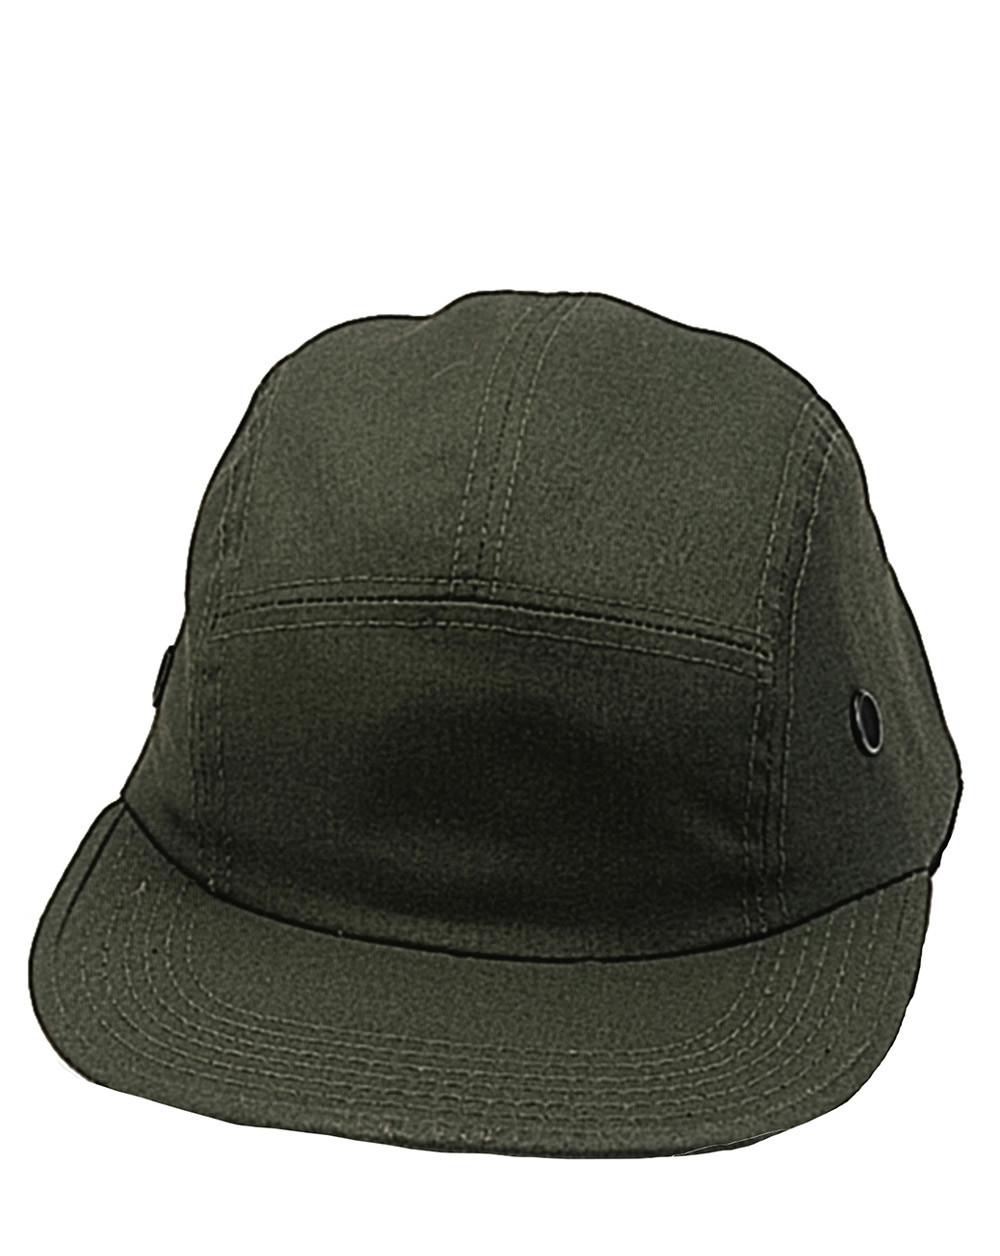 Rothco 5 Panel Military Street Cap (Oliven, One Size)